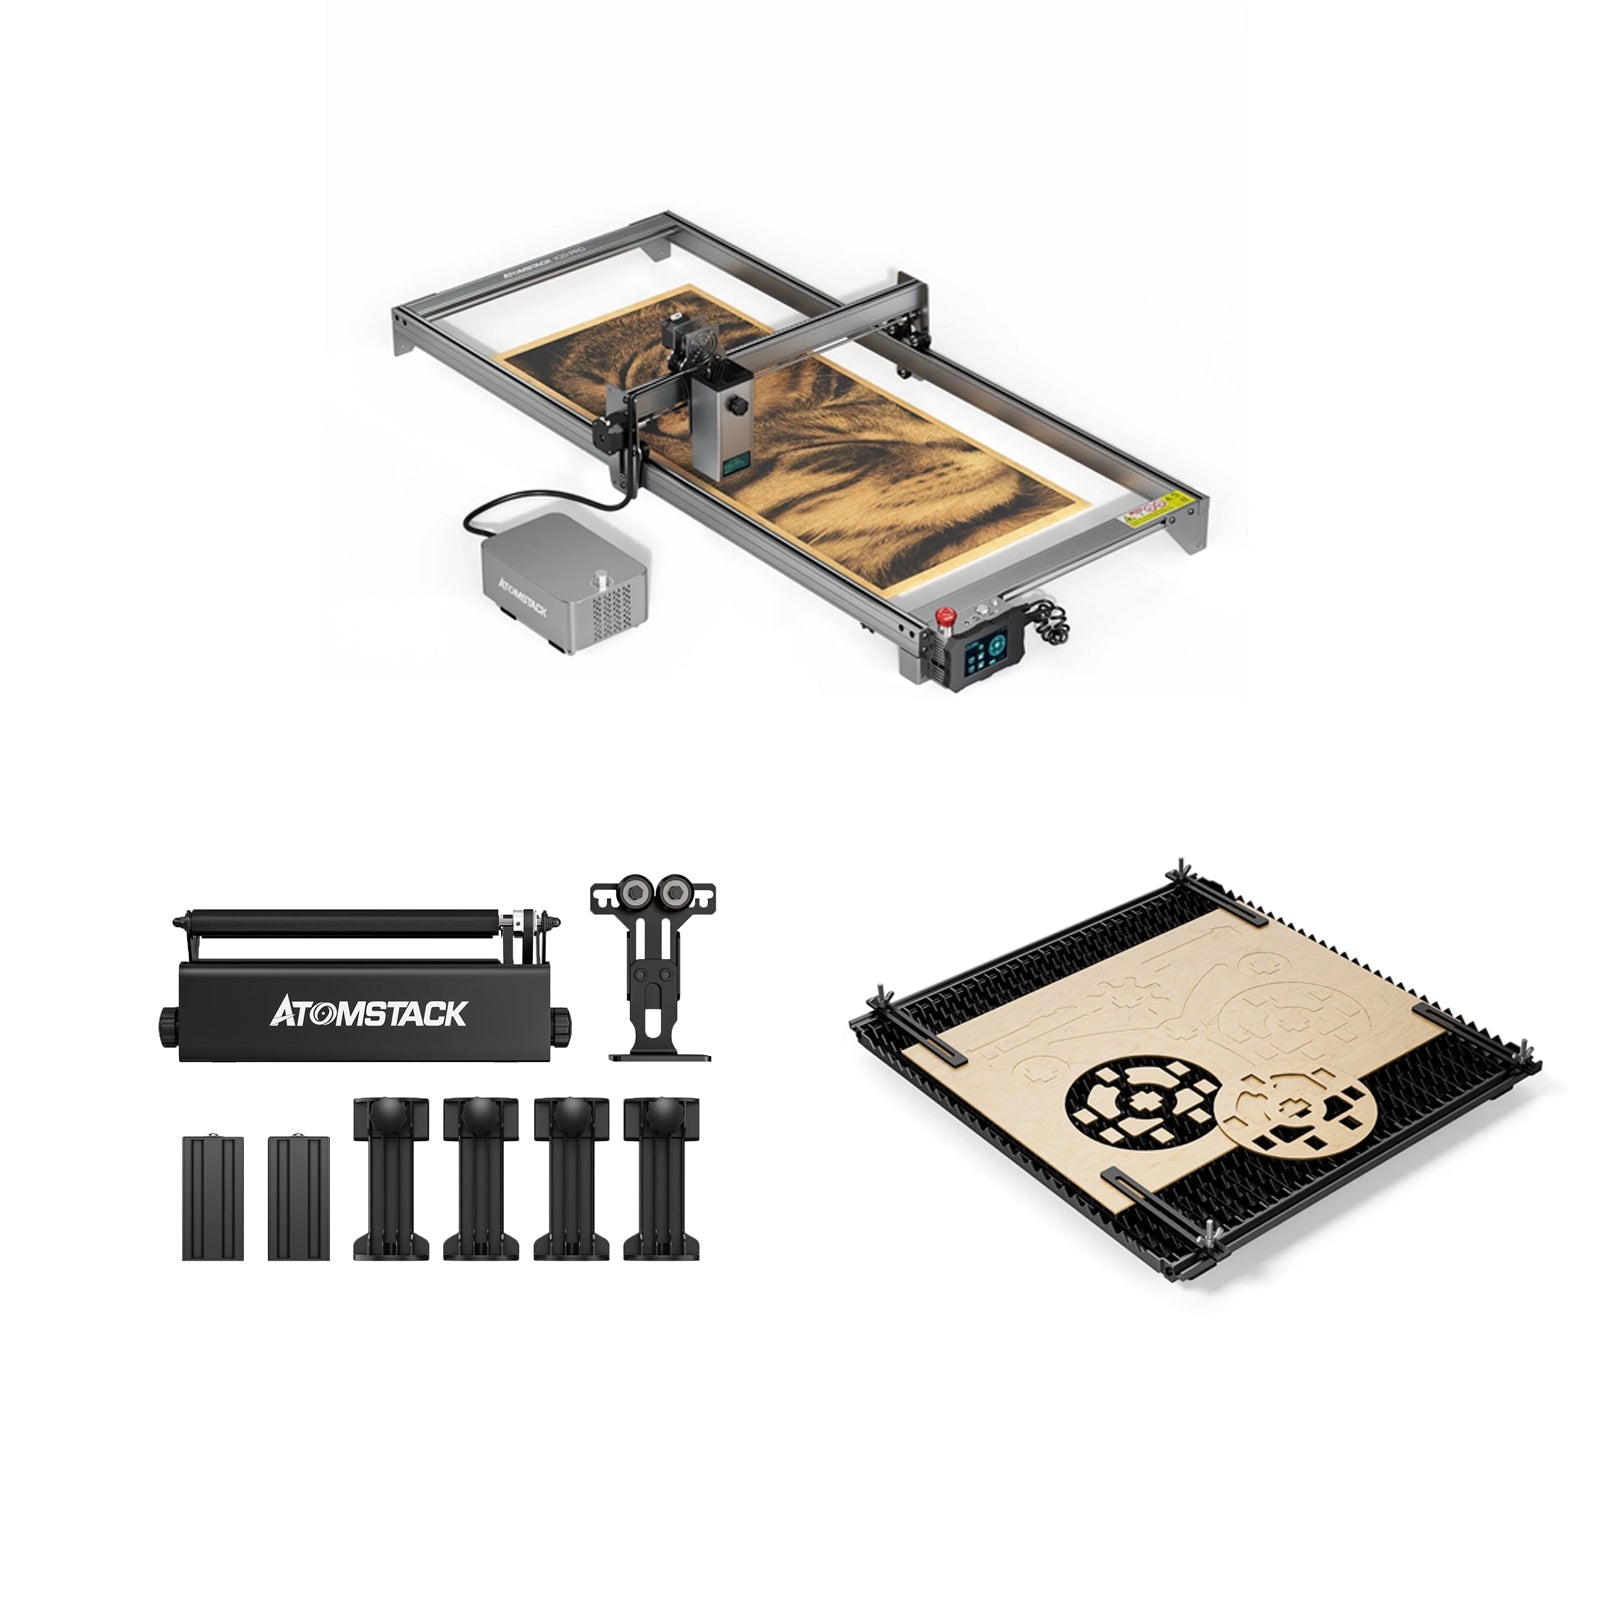 Extension Kit for Atomstack X20 Pro A20 S20 Pro X30 Pro + R3 Pro Rotary Roller + F3 Matrix Detachable Working Panel ( 460*850MM )